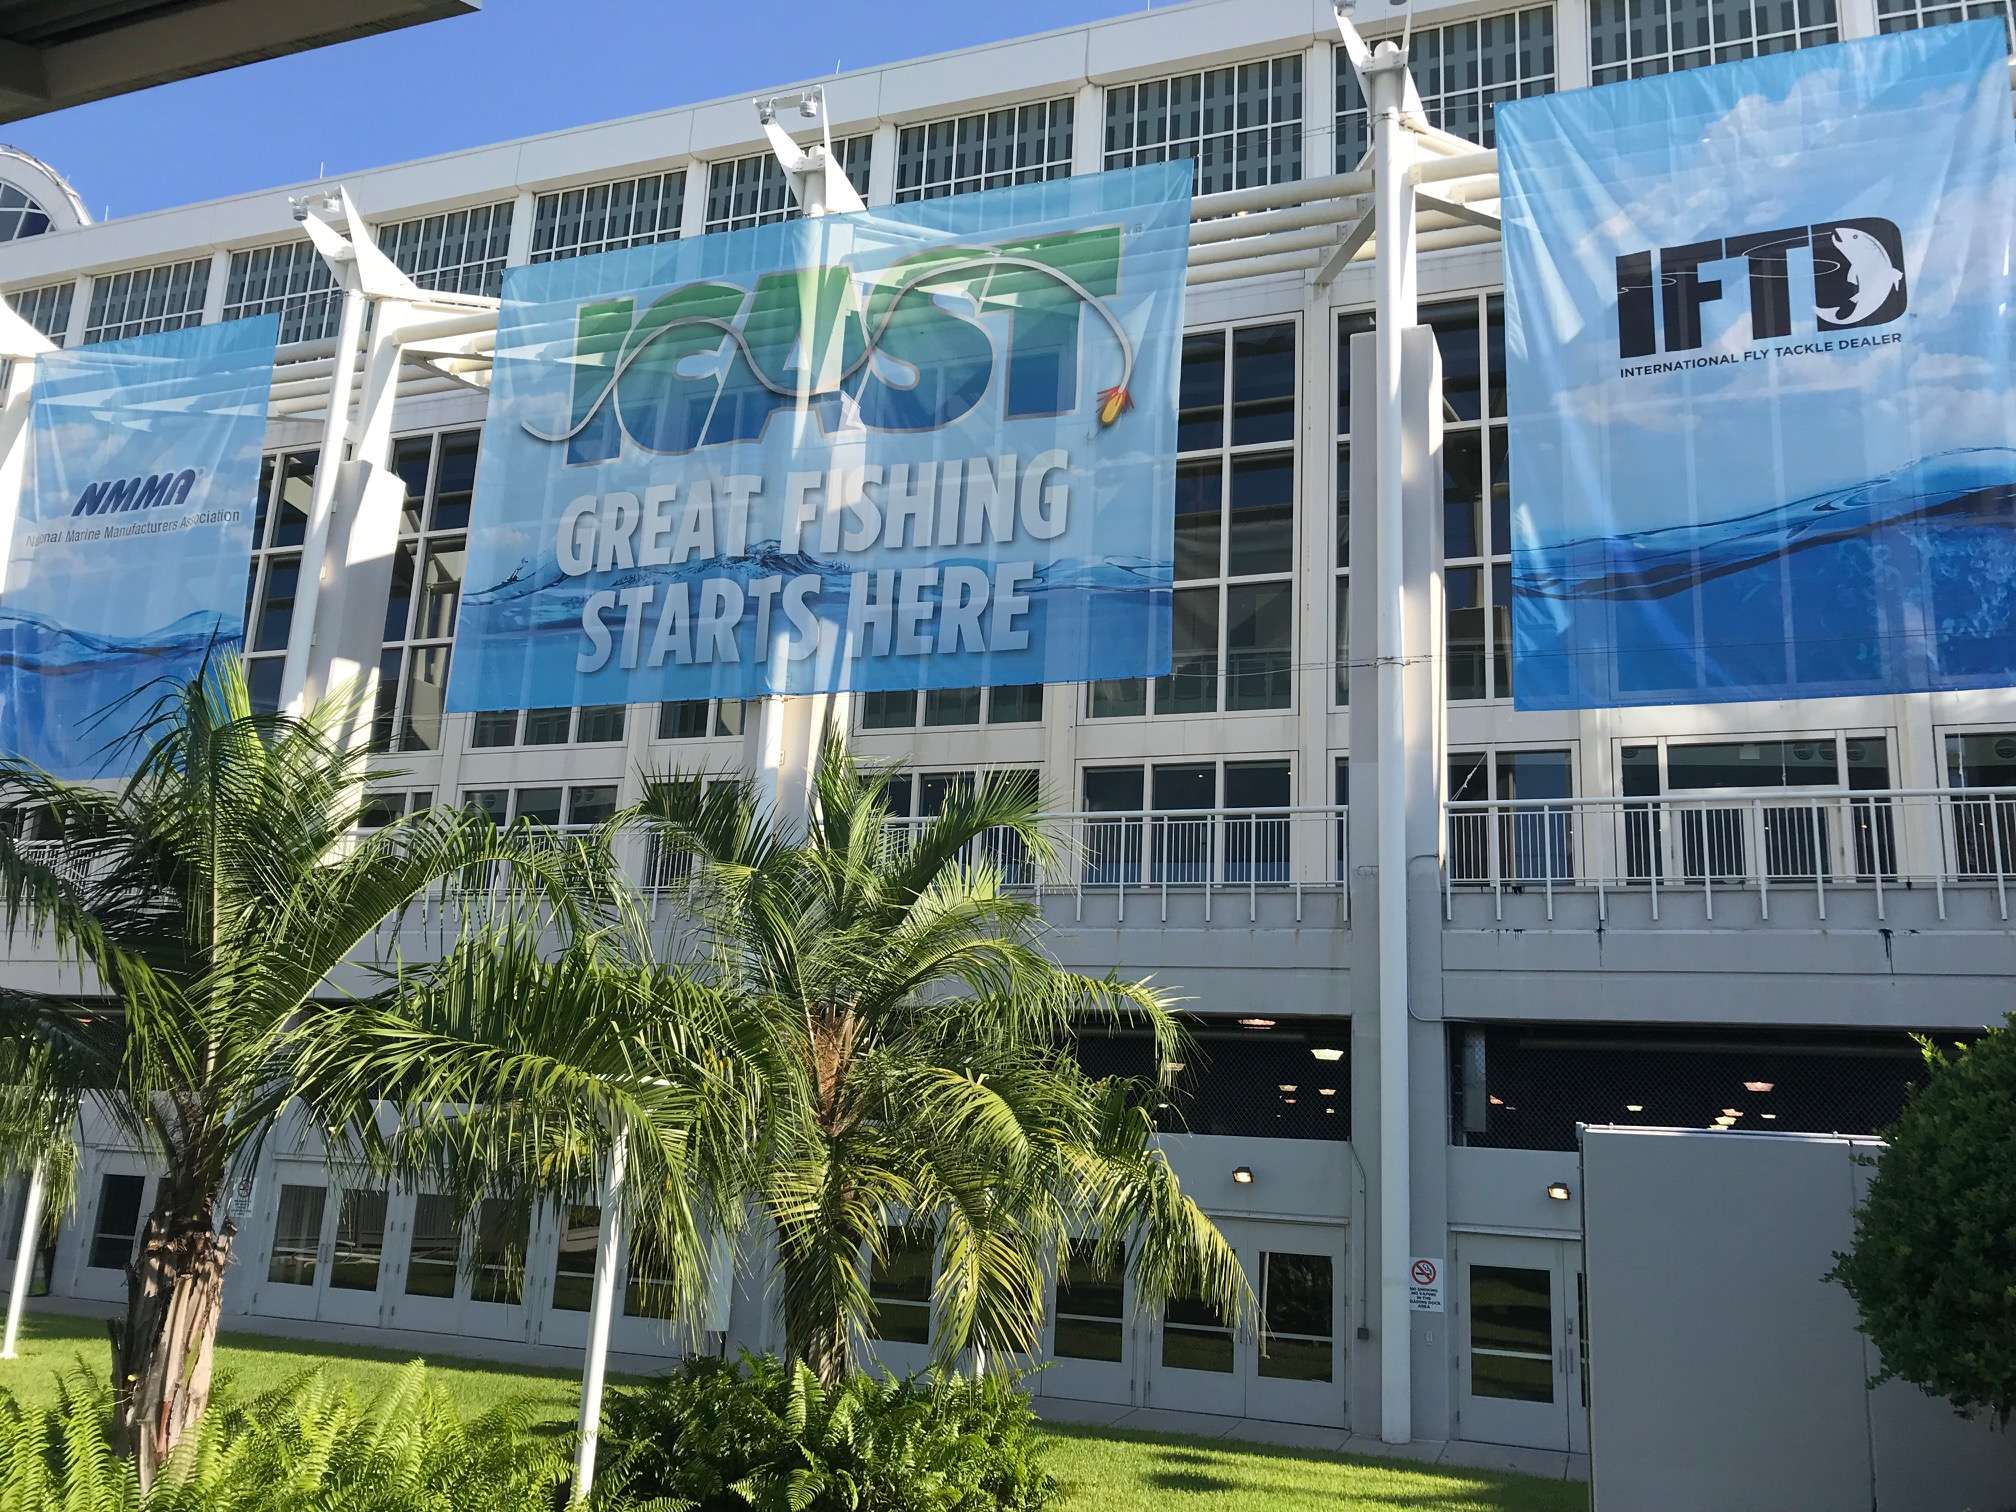 Welcome, welcome. Join along as we hit the showroom floor for ICAST 2018, the worldâs largest fishing tackle and trade show. The Sooch will take you around to see what he saw, like these 20-foot high banners greeting the 15,000 or so registered attendees who come from all over the world.